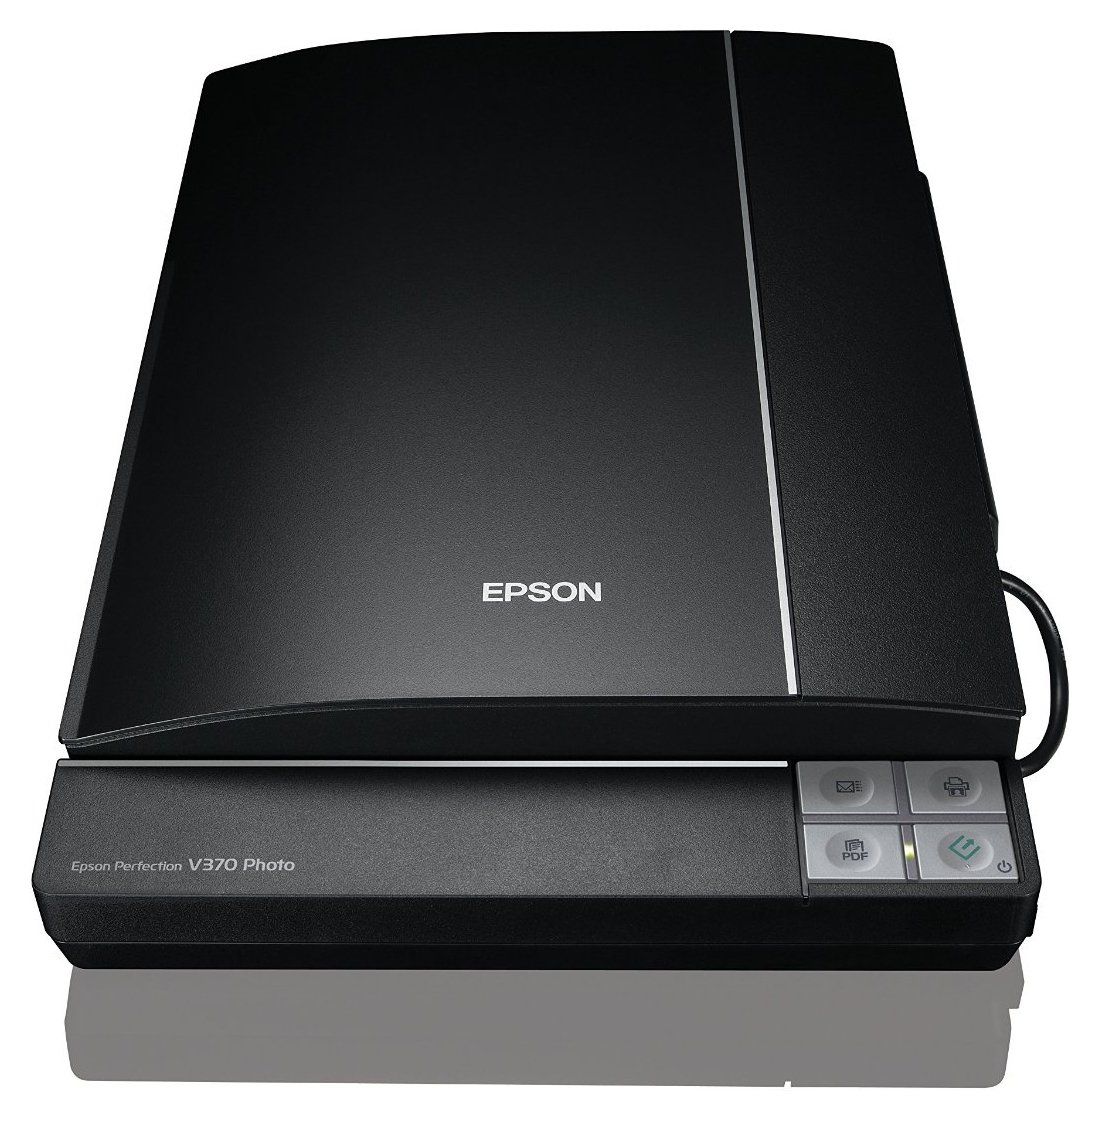 Epson Perfection V370 Photo Scanner. Review